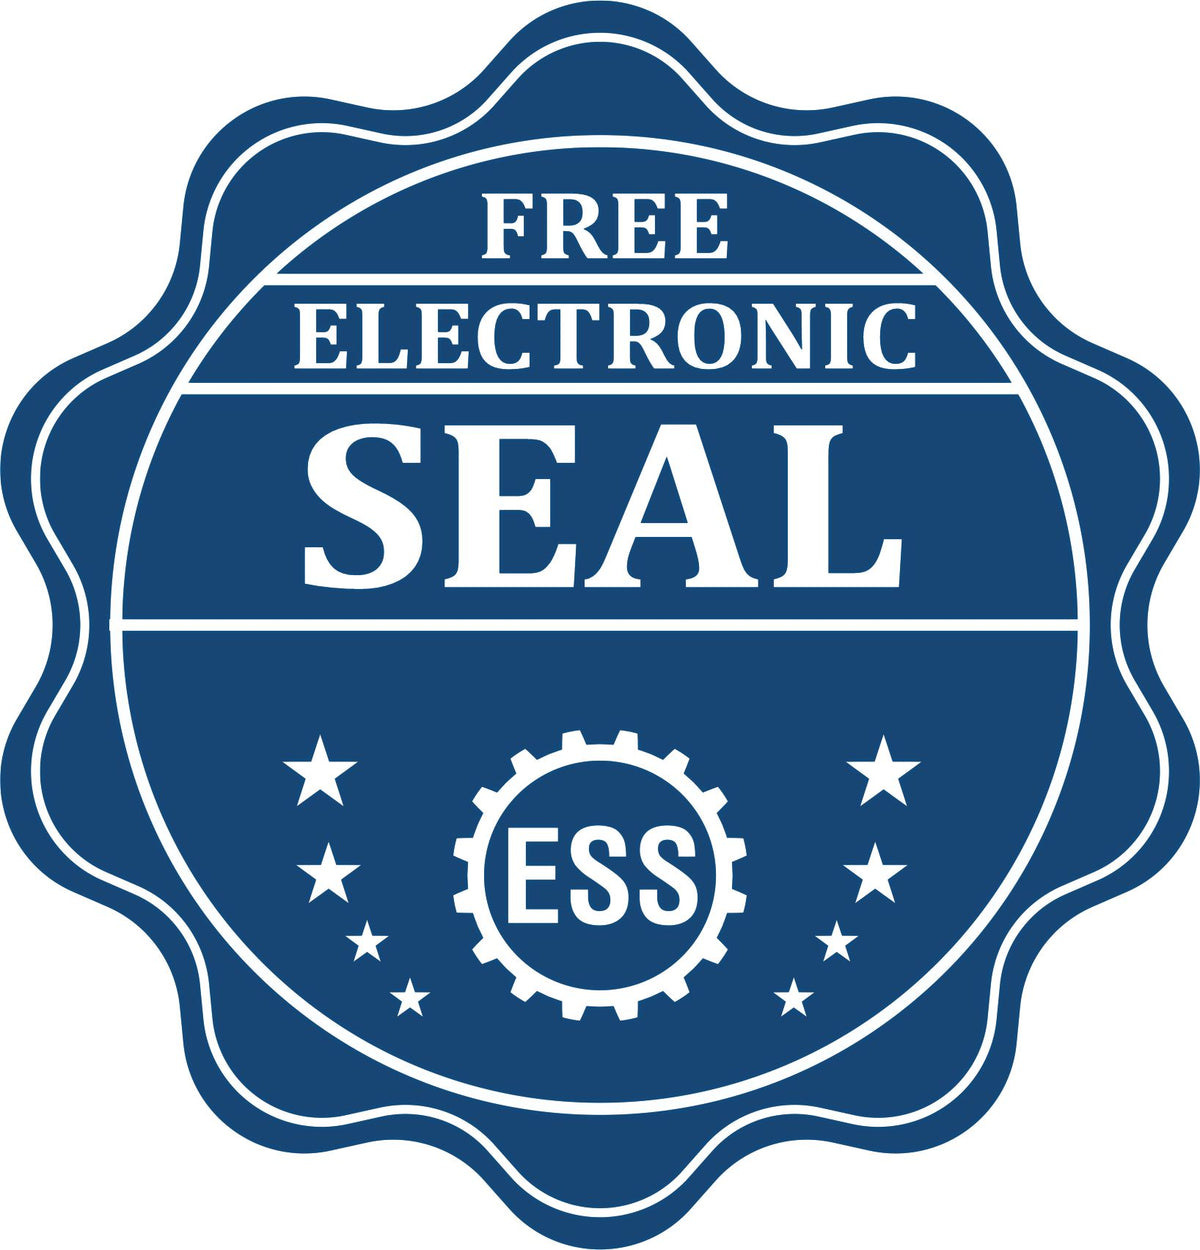 A badge showing a free electronic seal for the MaxLight Premium Pre-Inked Texas State Seal Notarial Stamp with stars and the ESS gear on the emblem.